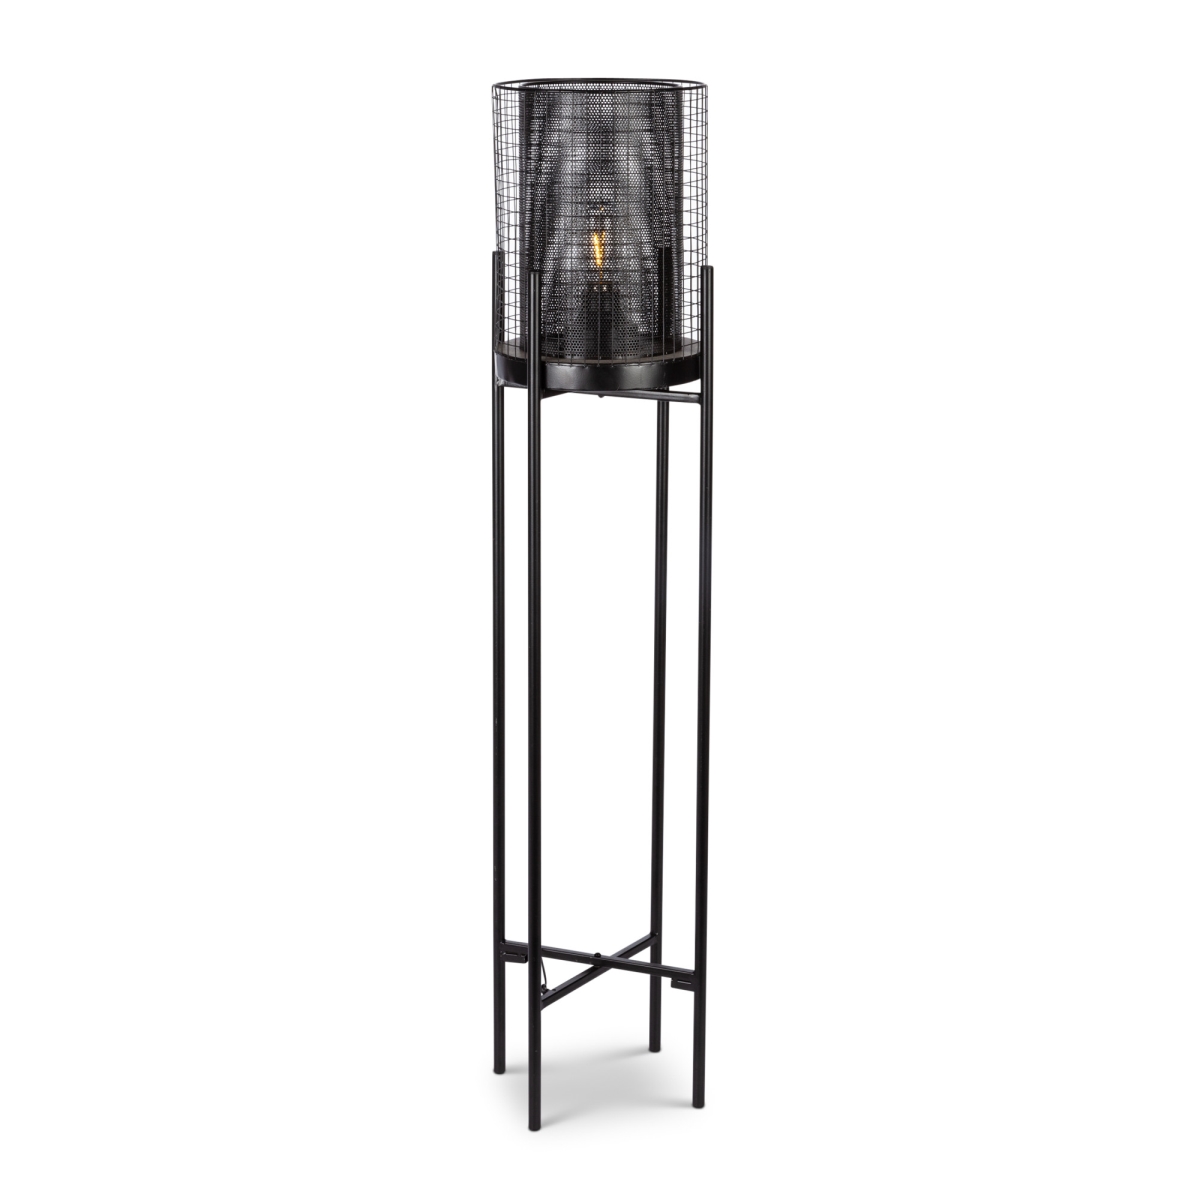 Gerson 44604ec 40 In. Battery-powered Black Metal Standing Floor Led Lamp With Glass Shade & Folding Stand - Grey